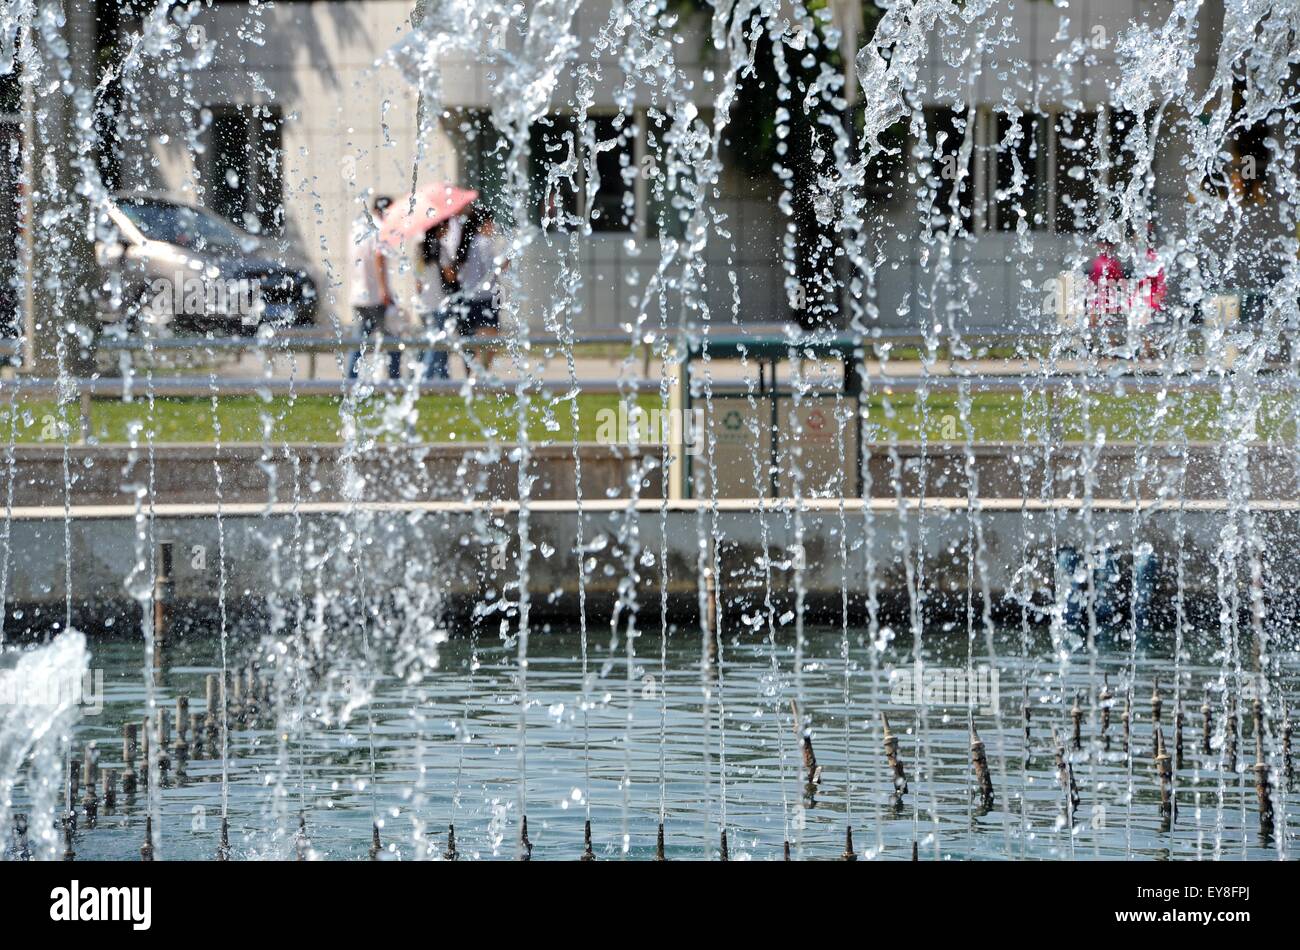 (150724) --YINCHUAN, July 24, 2015 (Xinhua) -- People walk past a fountain in Yinchuan, capital of northwest China's Ningxia Hui Autonomous Region, July 24, 2015. The Ningxia Weather Station issued a yellow alert for high temperature on Friday as the highest temperature in some parts of Ningxia is expected to reach 35 degrees Celsius in the next three days. (Xinhua/Peng Zhaozhi) (yxb) Stock Photo